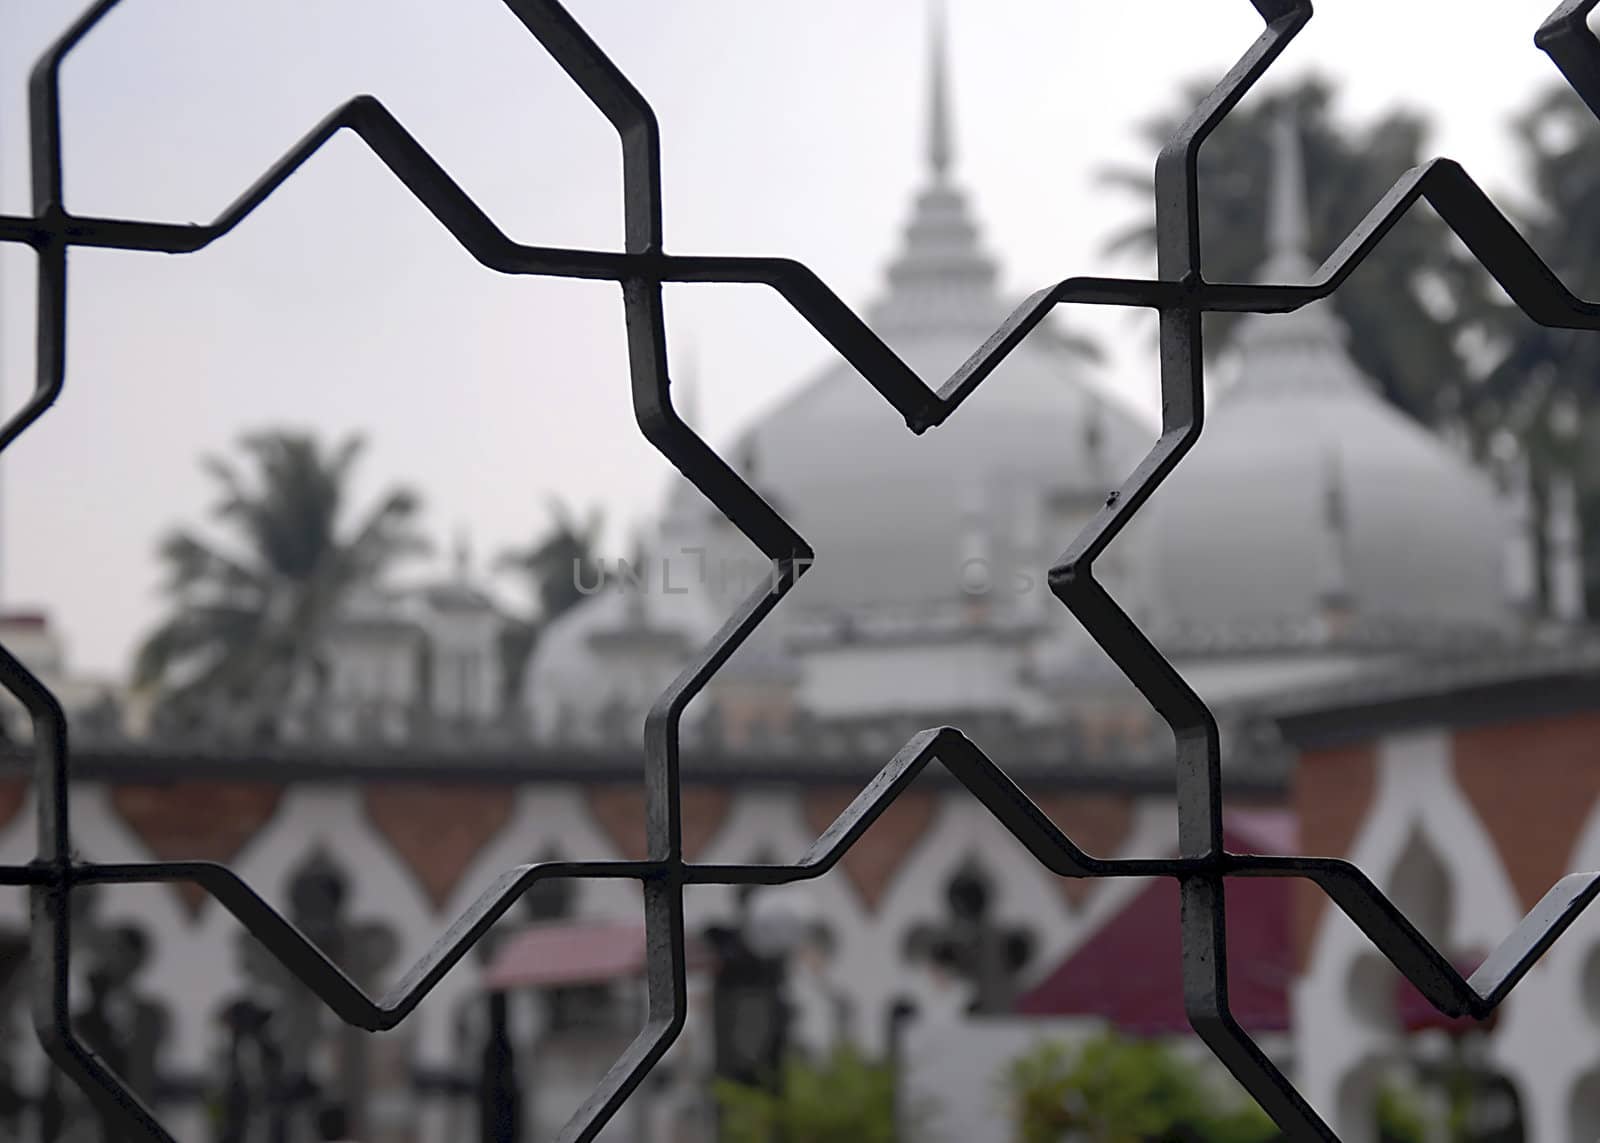 A beautiful wrought iron fence surrounds a mosque in Malaysia